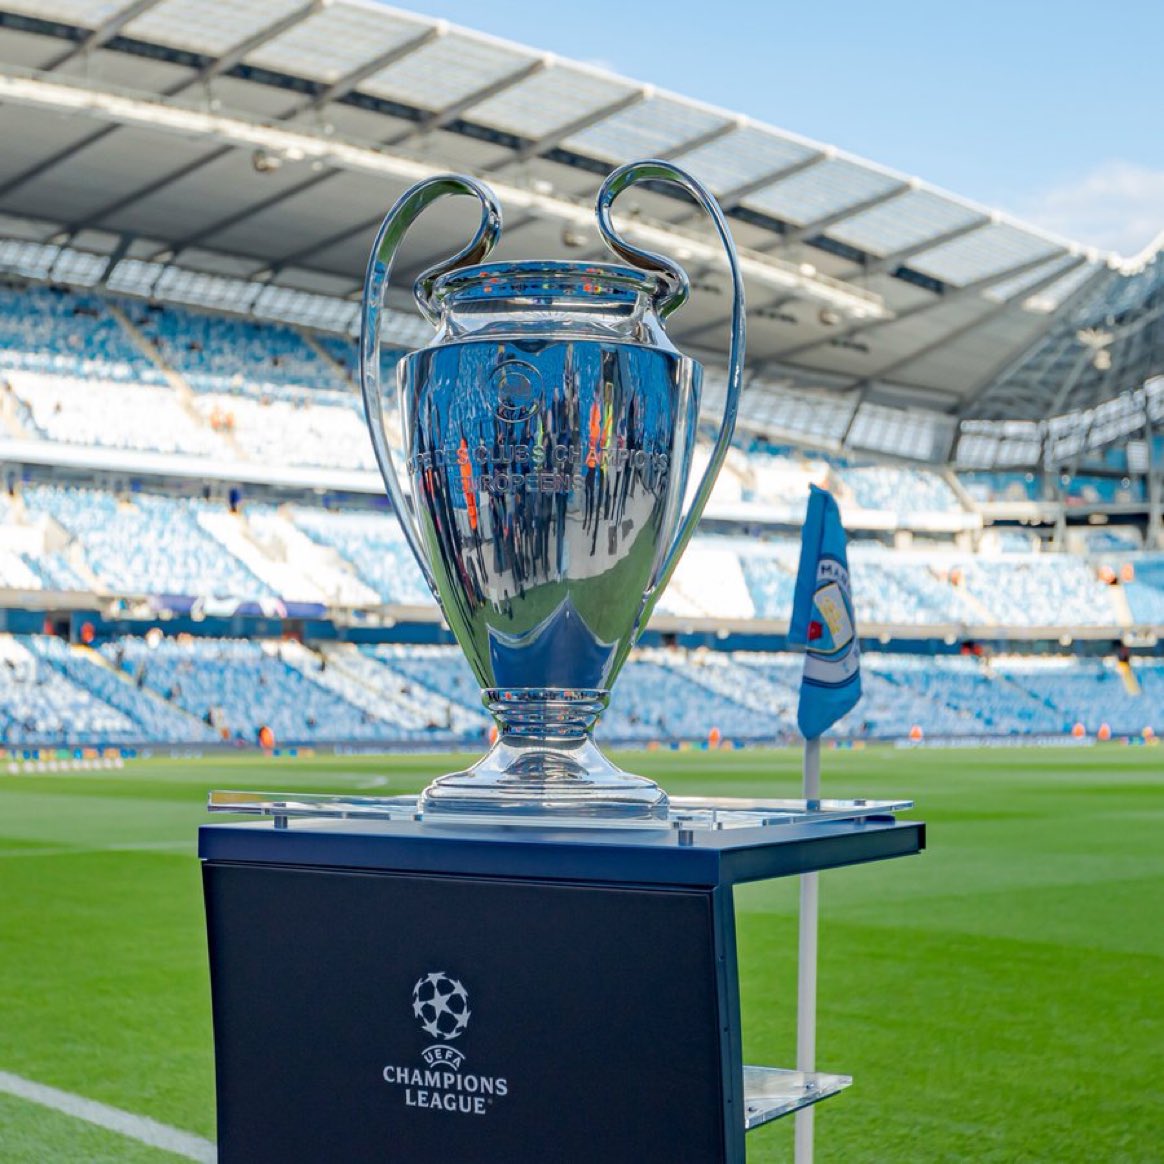 Man City will display their only UCL trophy to flex on Real Madrid who has 14 already. Ah Freshers ankasa smh😂😂😂